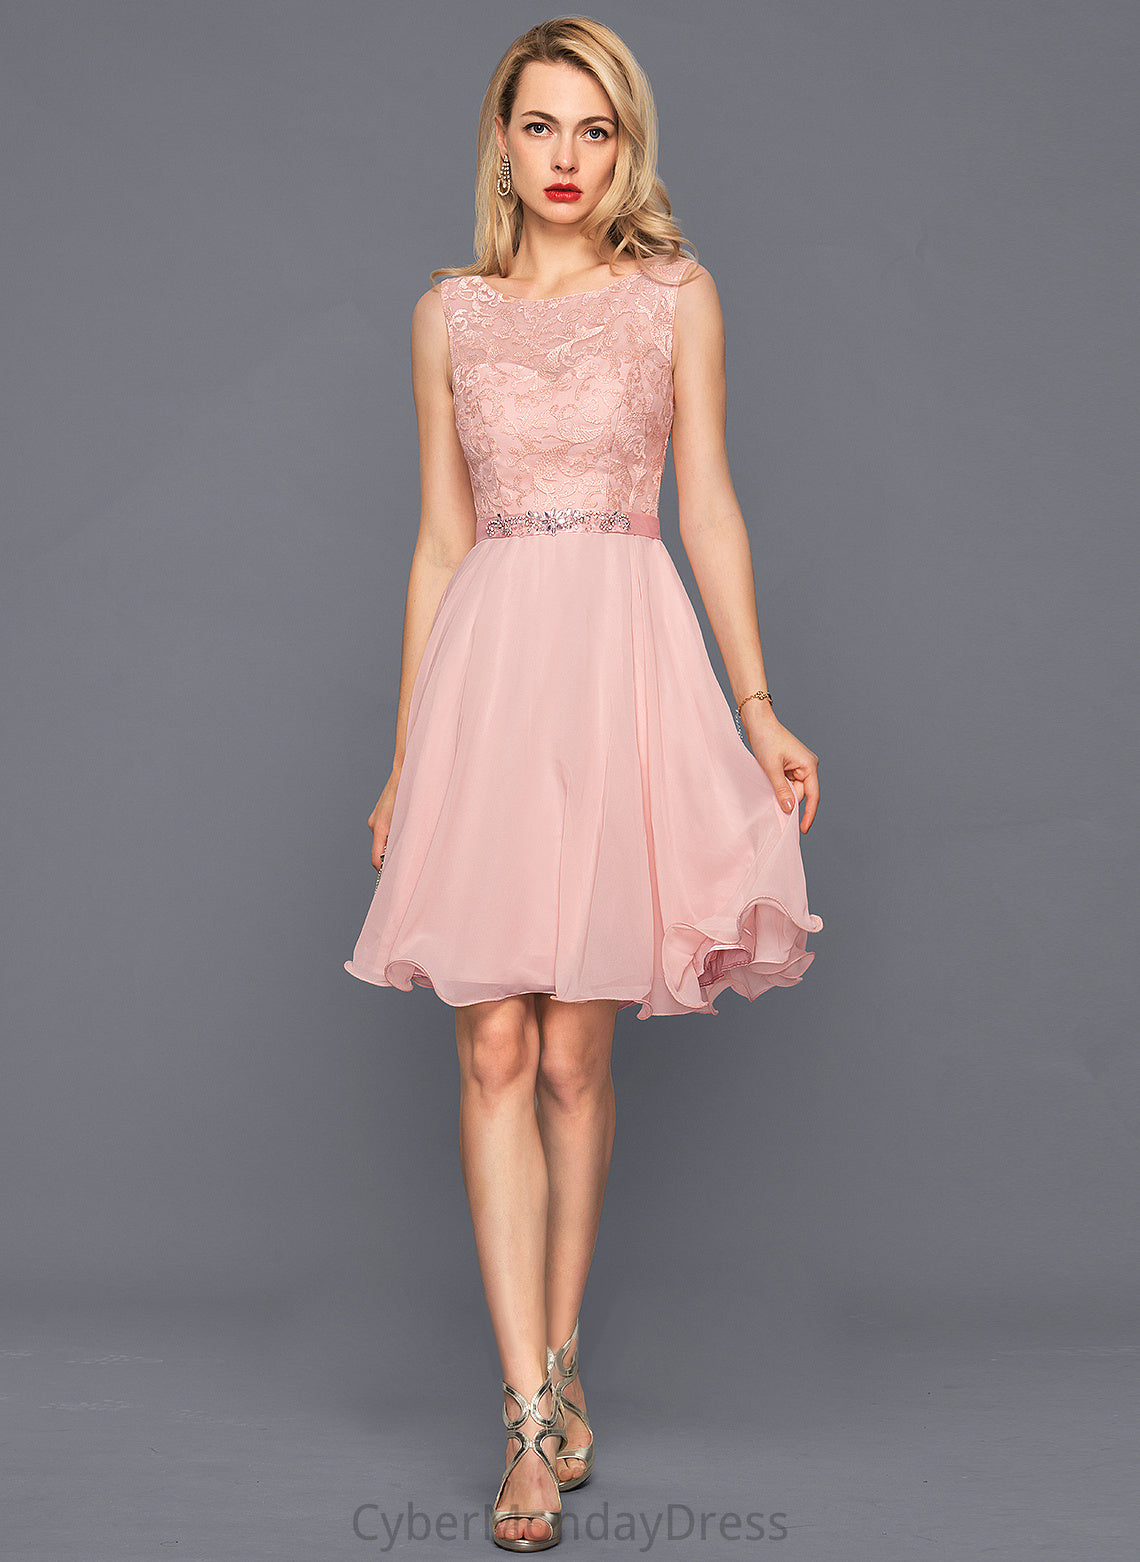 Neck Beading Giovanna Dress Cocktail Dresses Chiffon Scoop Knee-Length Lace With Charmeuse Cocktail A-Line Sequins